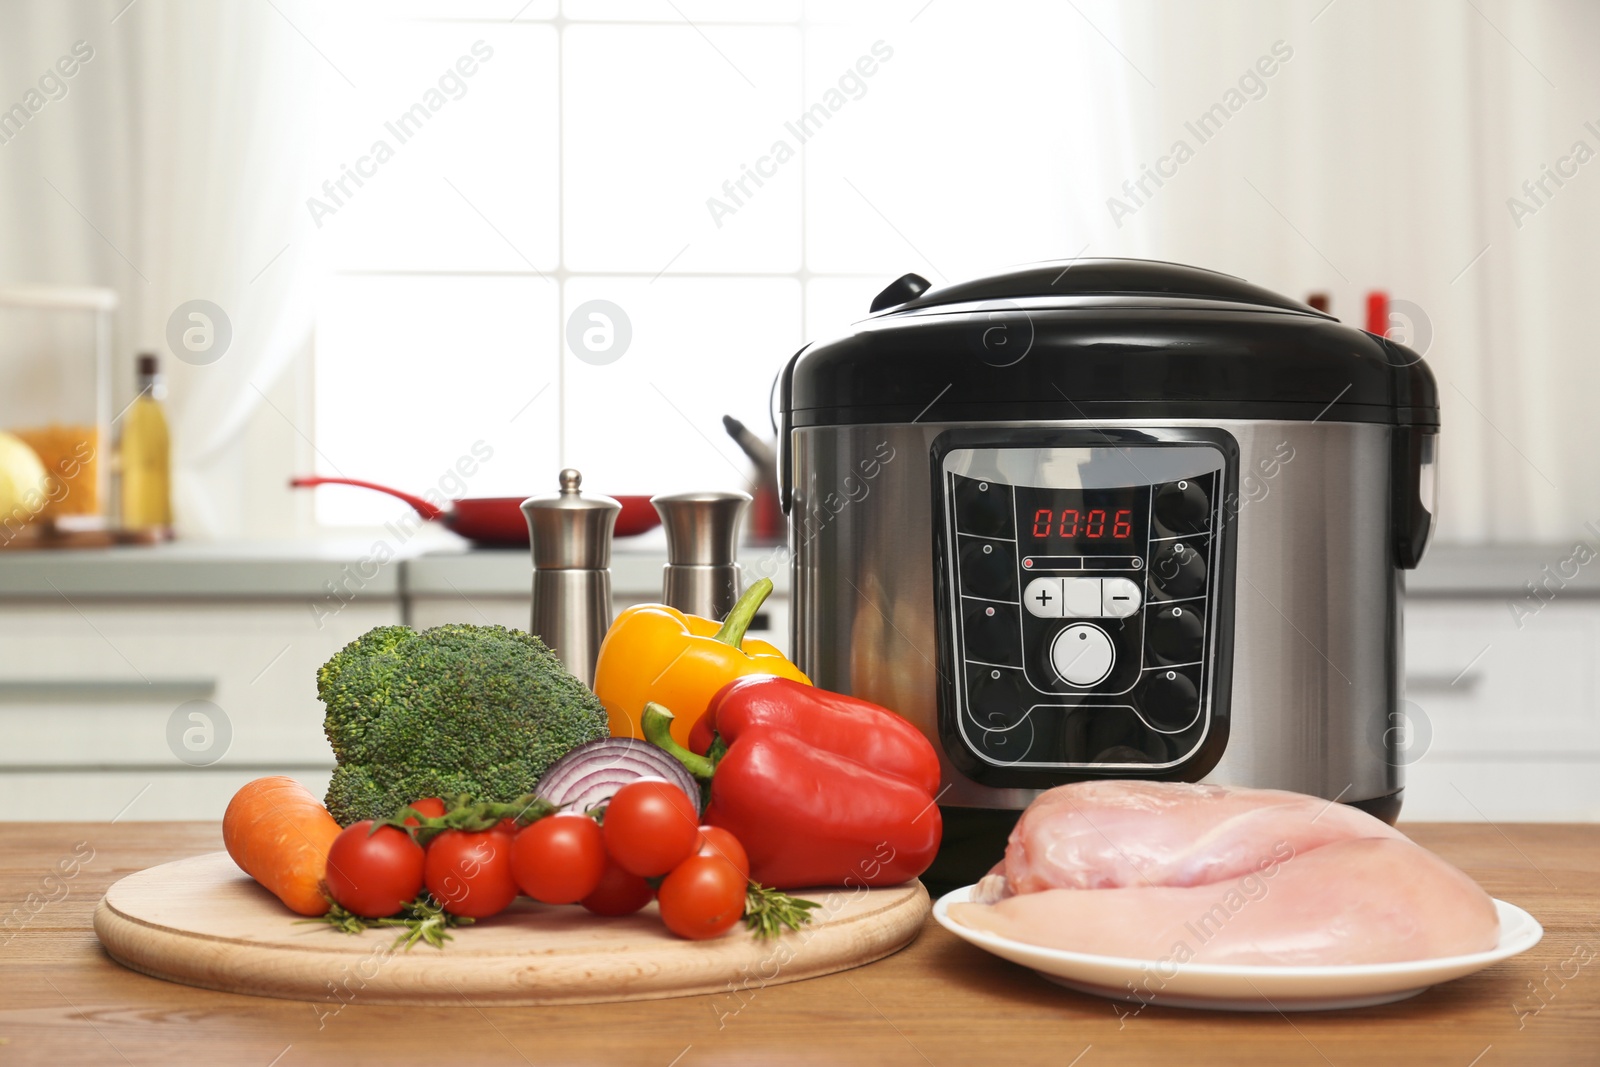 Photo of Modern multi cooker and ingredients on wooden table in kitchen